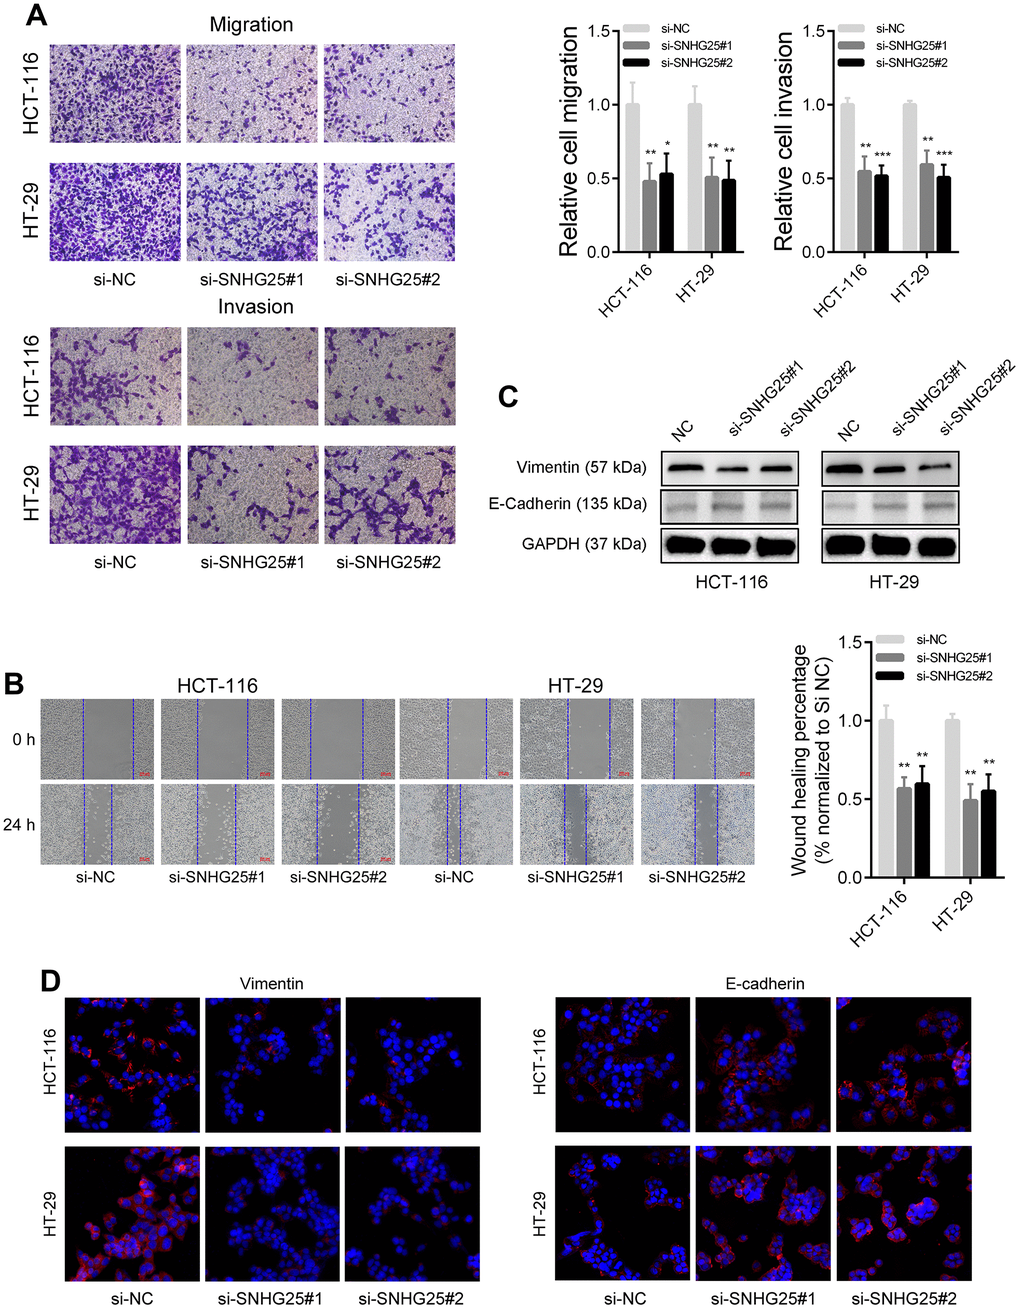 SNHG25 regulates CRC cells metastasis. (A) The migration and invasion abilities of HCT-116 and HT-29 cells were evaluated using transwell assays. (B) Representative images of wound healing assays performed using HCT-116 and HT-29 cells after SNHG25 silenced. (C) The expression of Vimentin and E-Cadherin were examined by western blot in SNHG25 knockdown HCT-116 and HT-29 cells. (D) The expression of Vimentin and E-Cadherin were detected by immunofluorescence after SNHG25 silencing. *P 